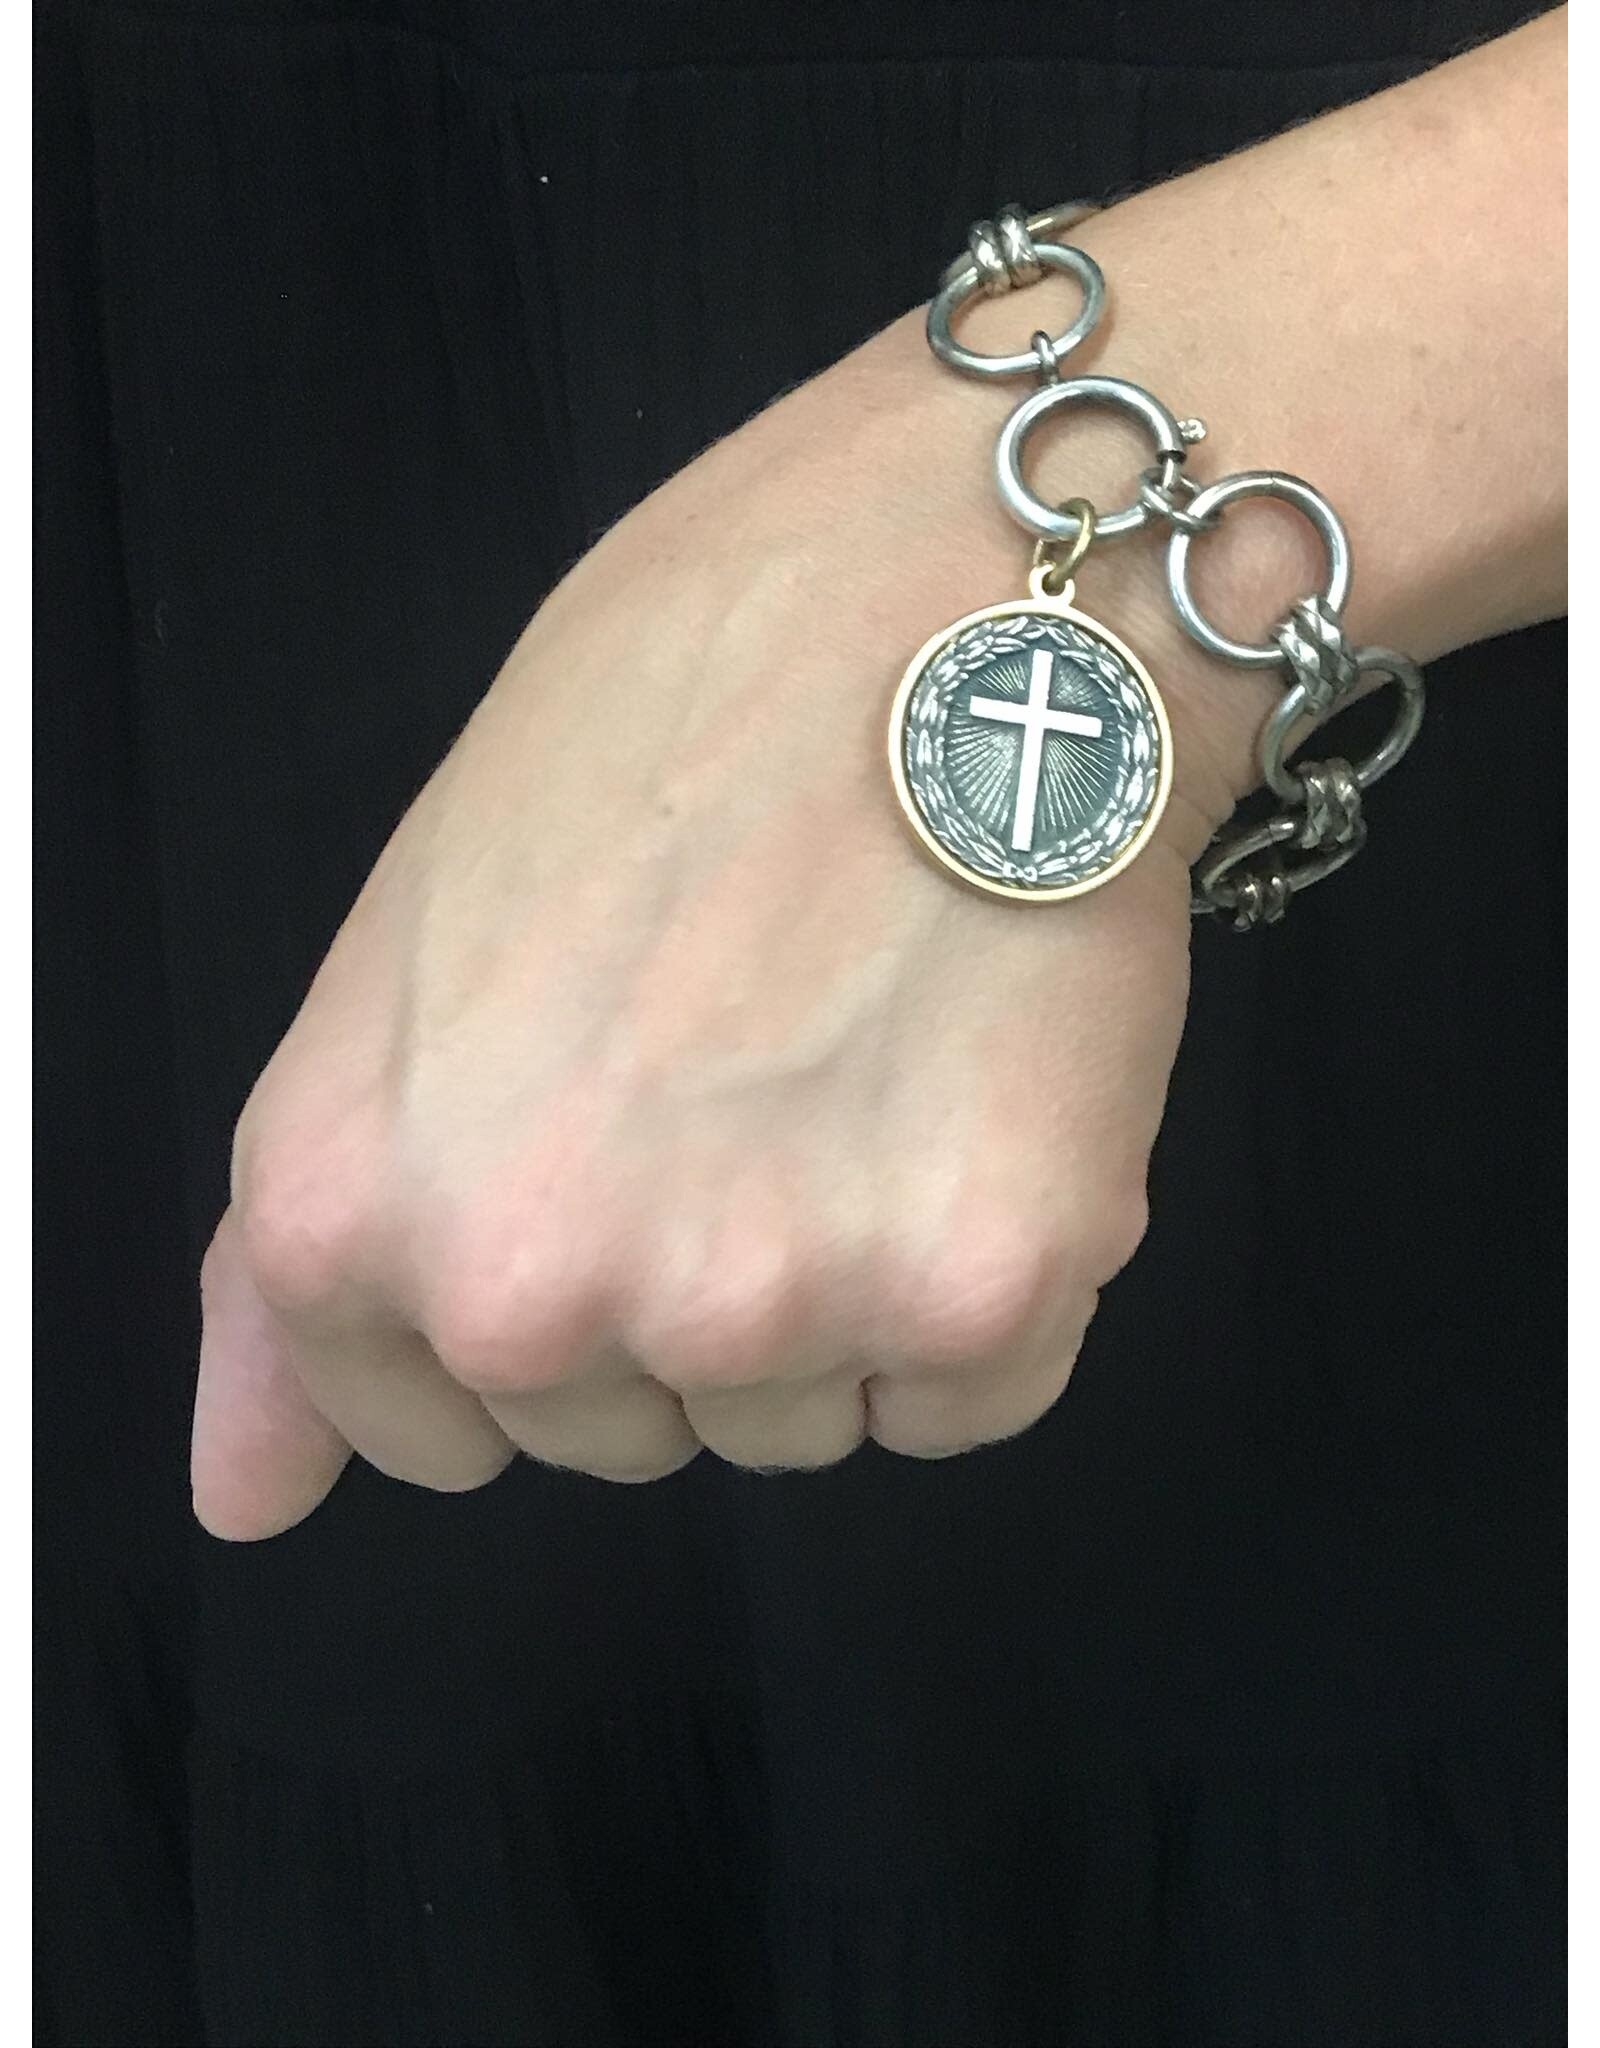 Erin Knight Designs Silver Chain Bracelet with Cross Coin Pendant